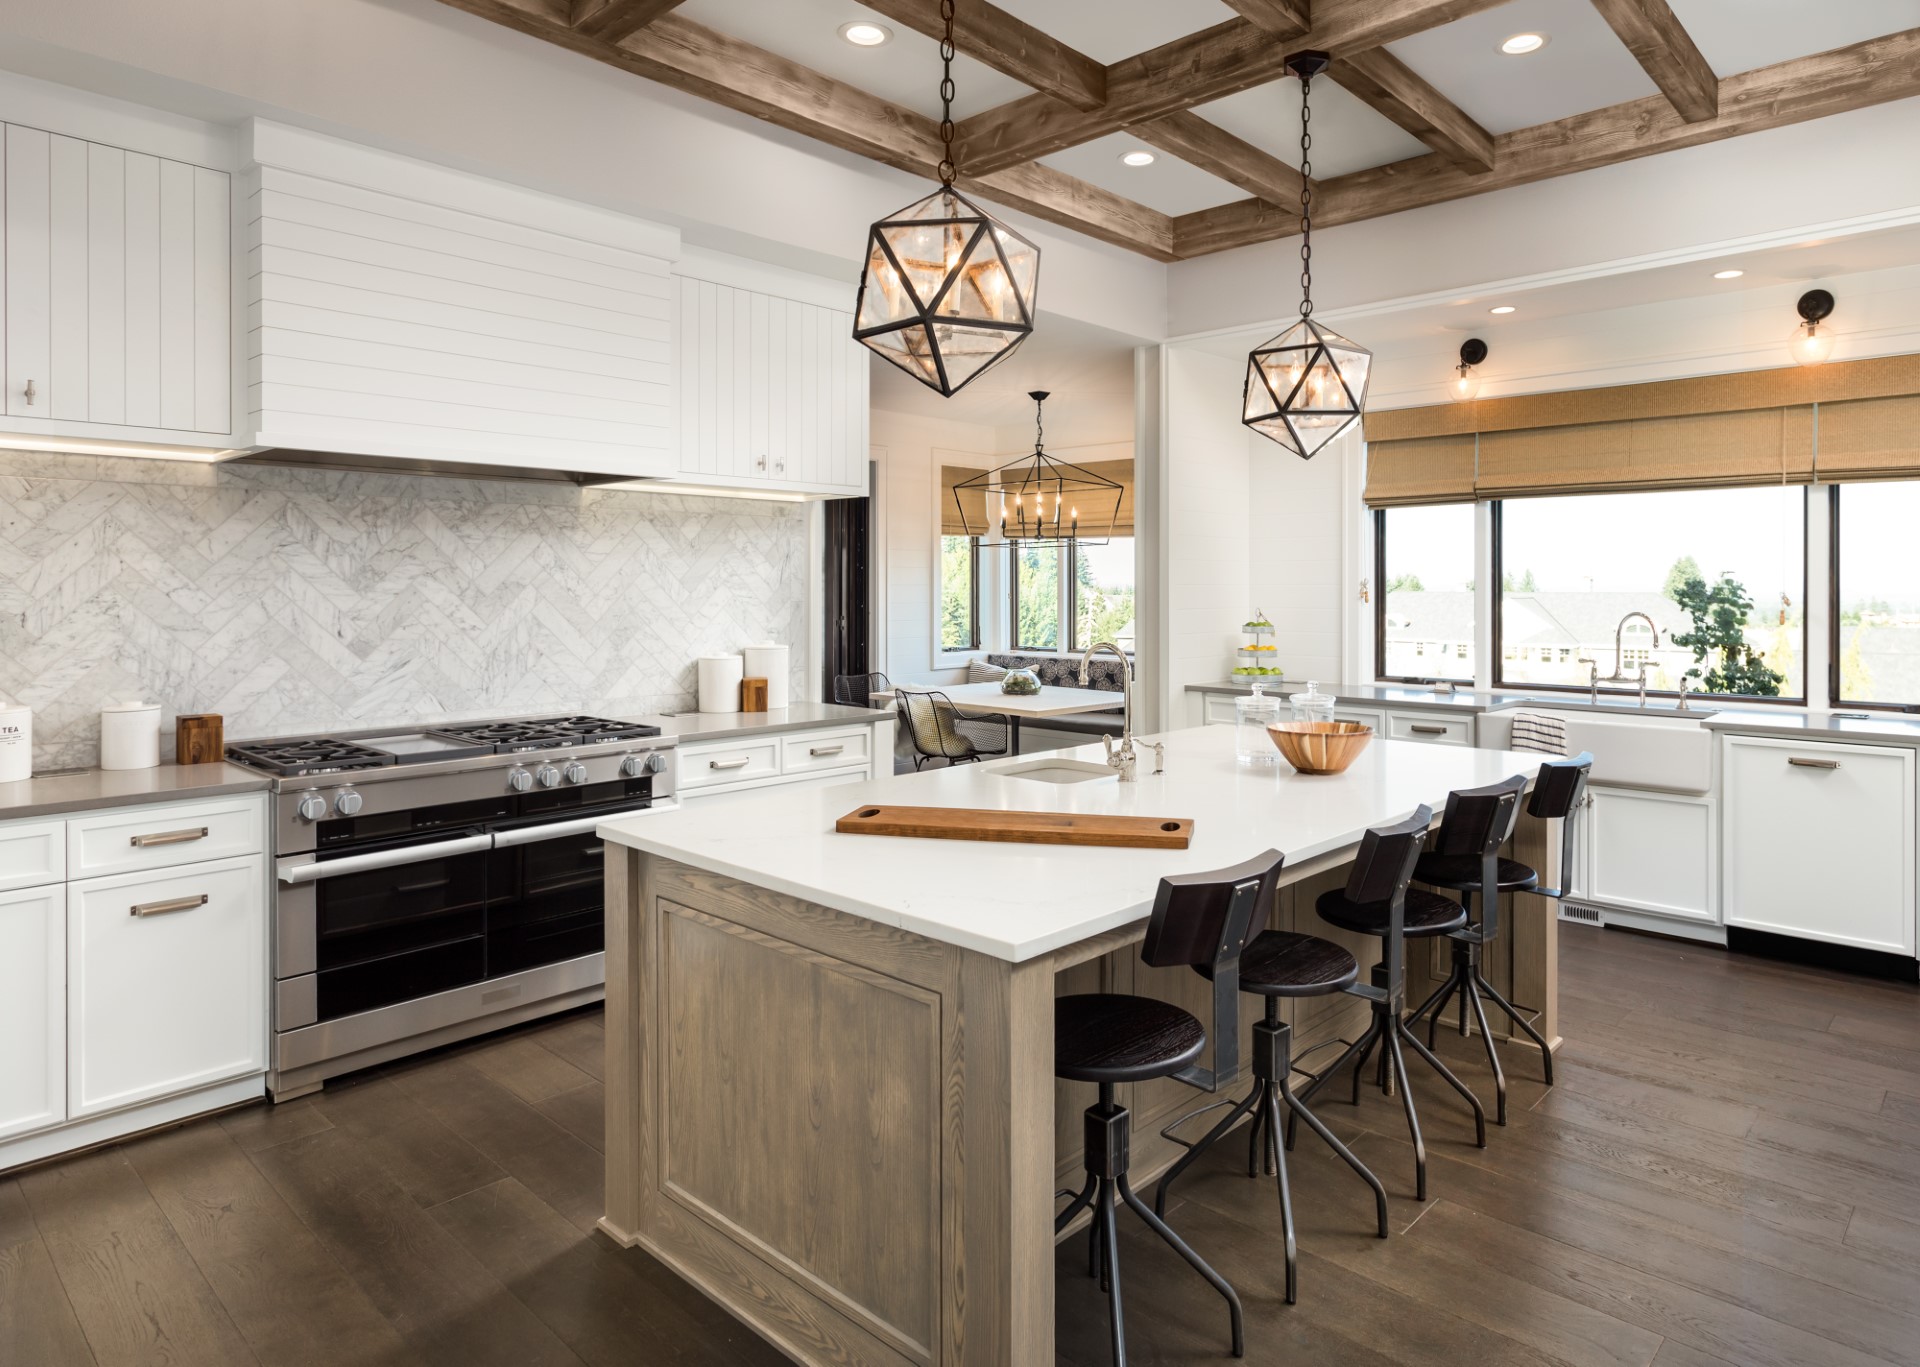 This kitchen takes on a very coastal feel, but the main decoration is the pendant lights with distinct geometric ambiance that catches your eye. The stained wood beams help make this layout truly majestic. The call